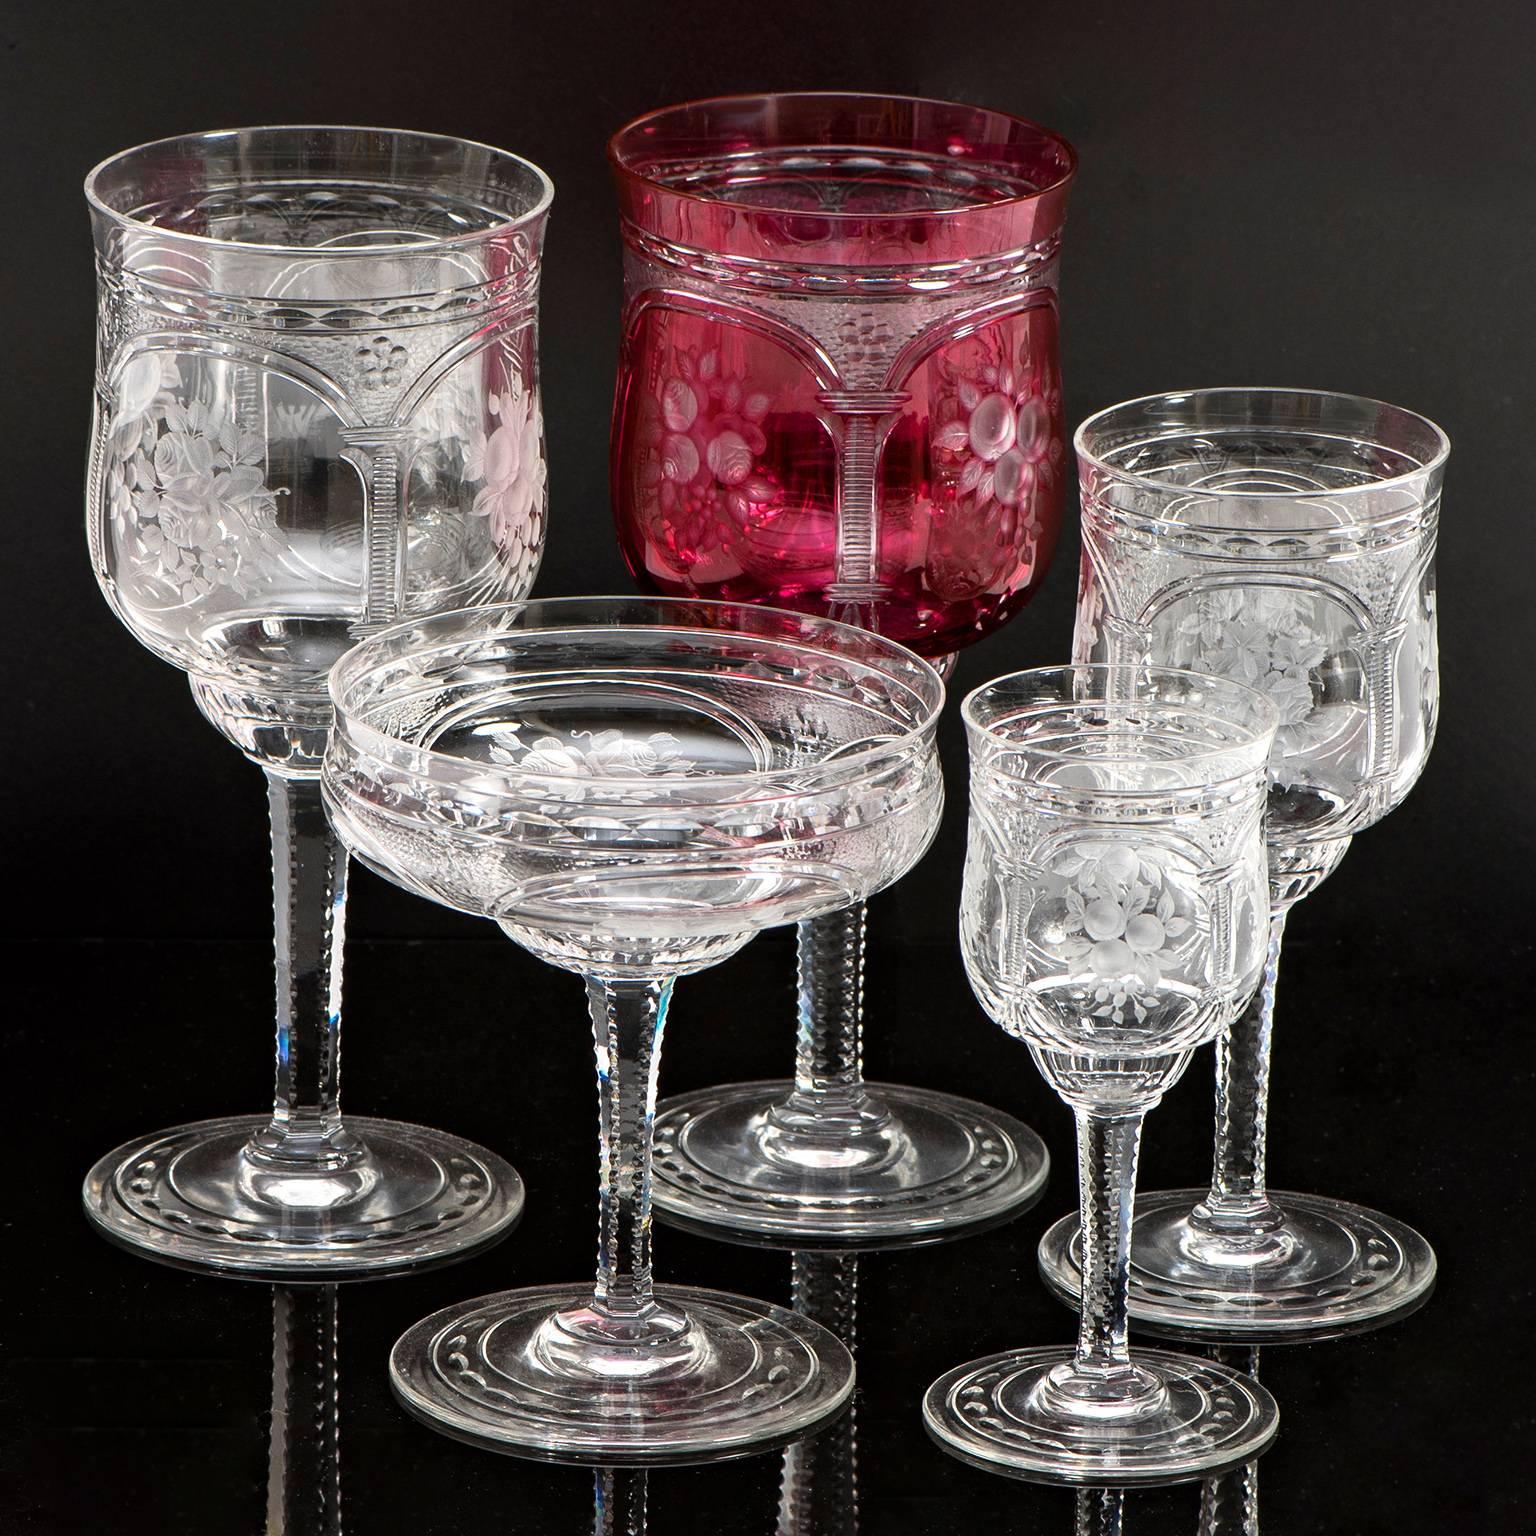 Circa 1900, by Baccarat, French. These magnificent late nineteenth-century crystal goblets by Baccarat showcase the superb skill and craftsmanship of France's finest glass house. Each of the 57 pieces is exquisitely detailed with neoclassical